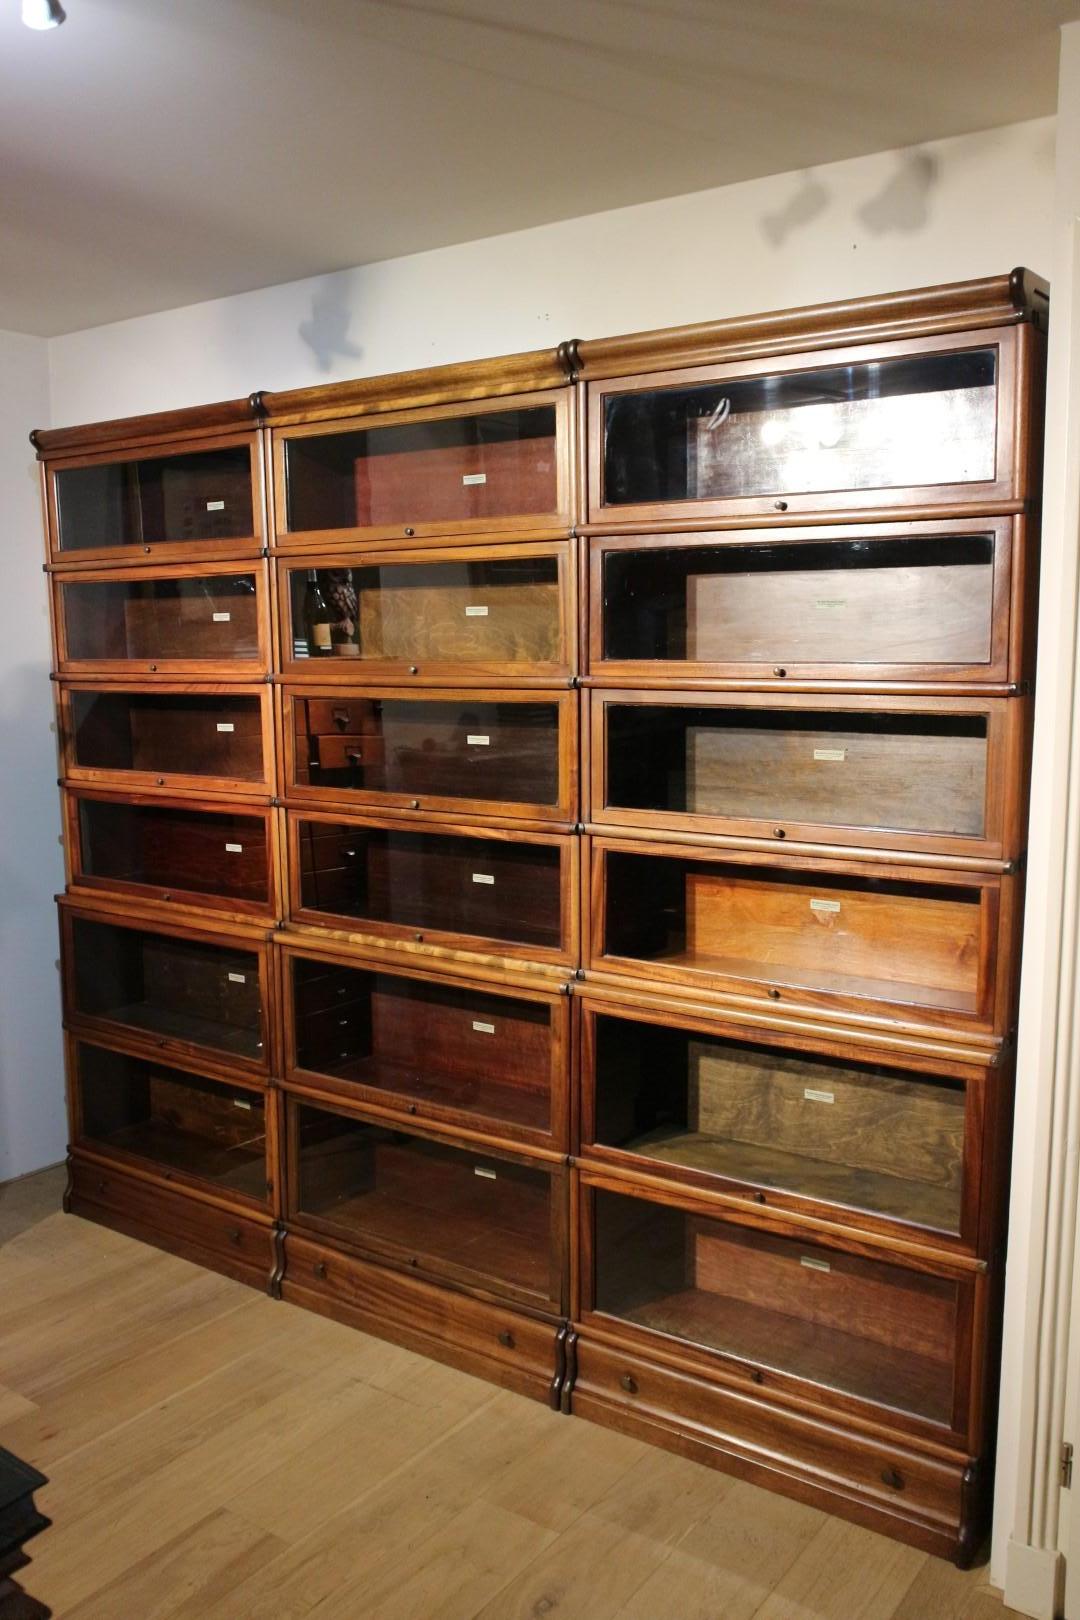 Antique mahogany Globe Wernicke bookcase in good condition. The cabinet consists of 18 stackable parts. Varying in depth and height. There are drawers in the feet. 

Origin: England
Period: Approx. 1900
Size: 260cm x 29/26cm x height 218cm.